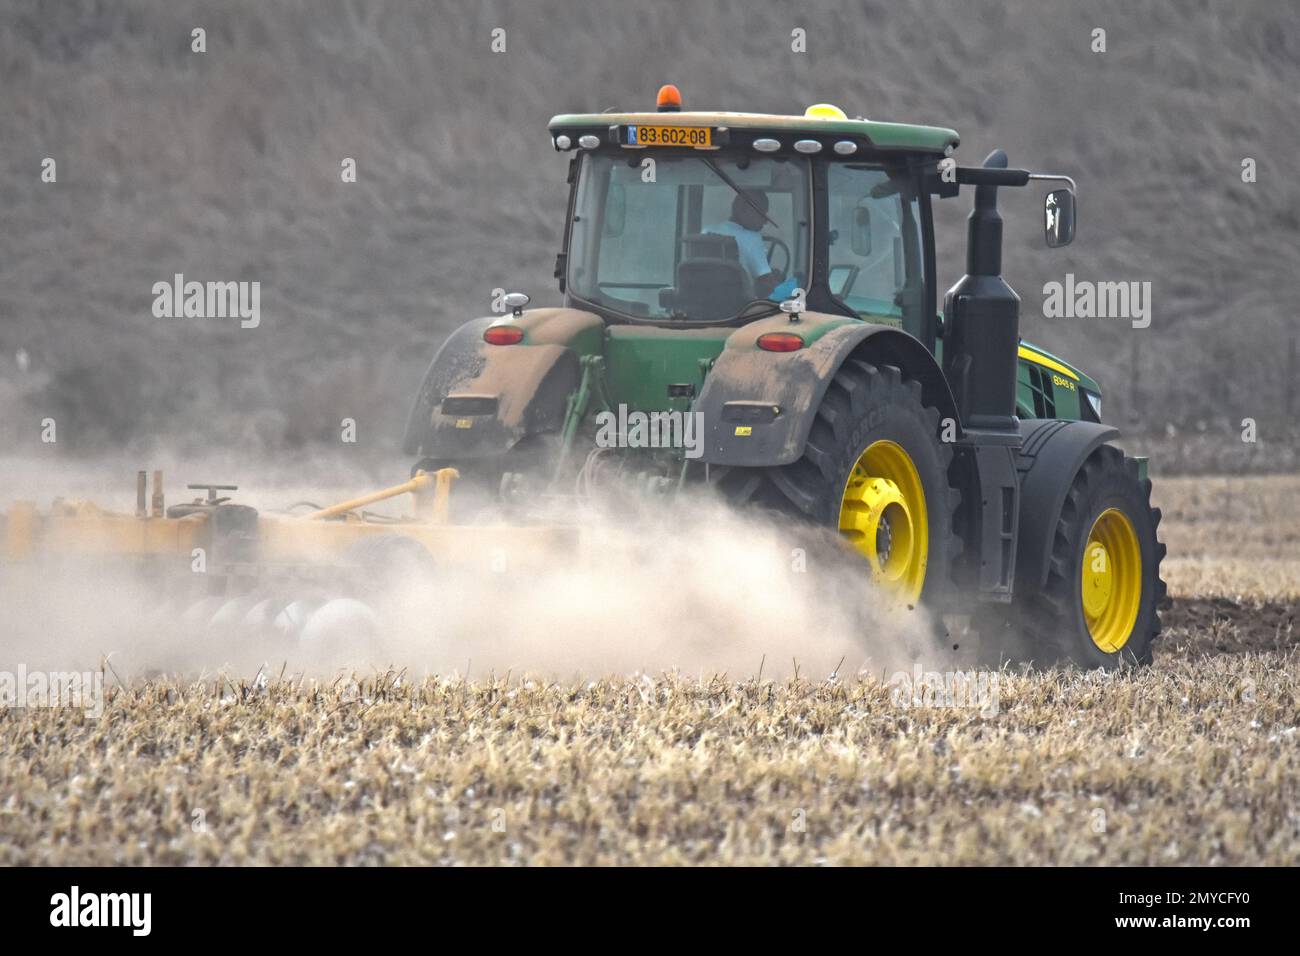 Tractor  plowing soil in dry field Stock Photo